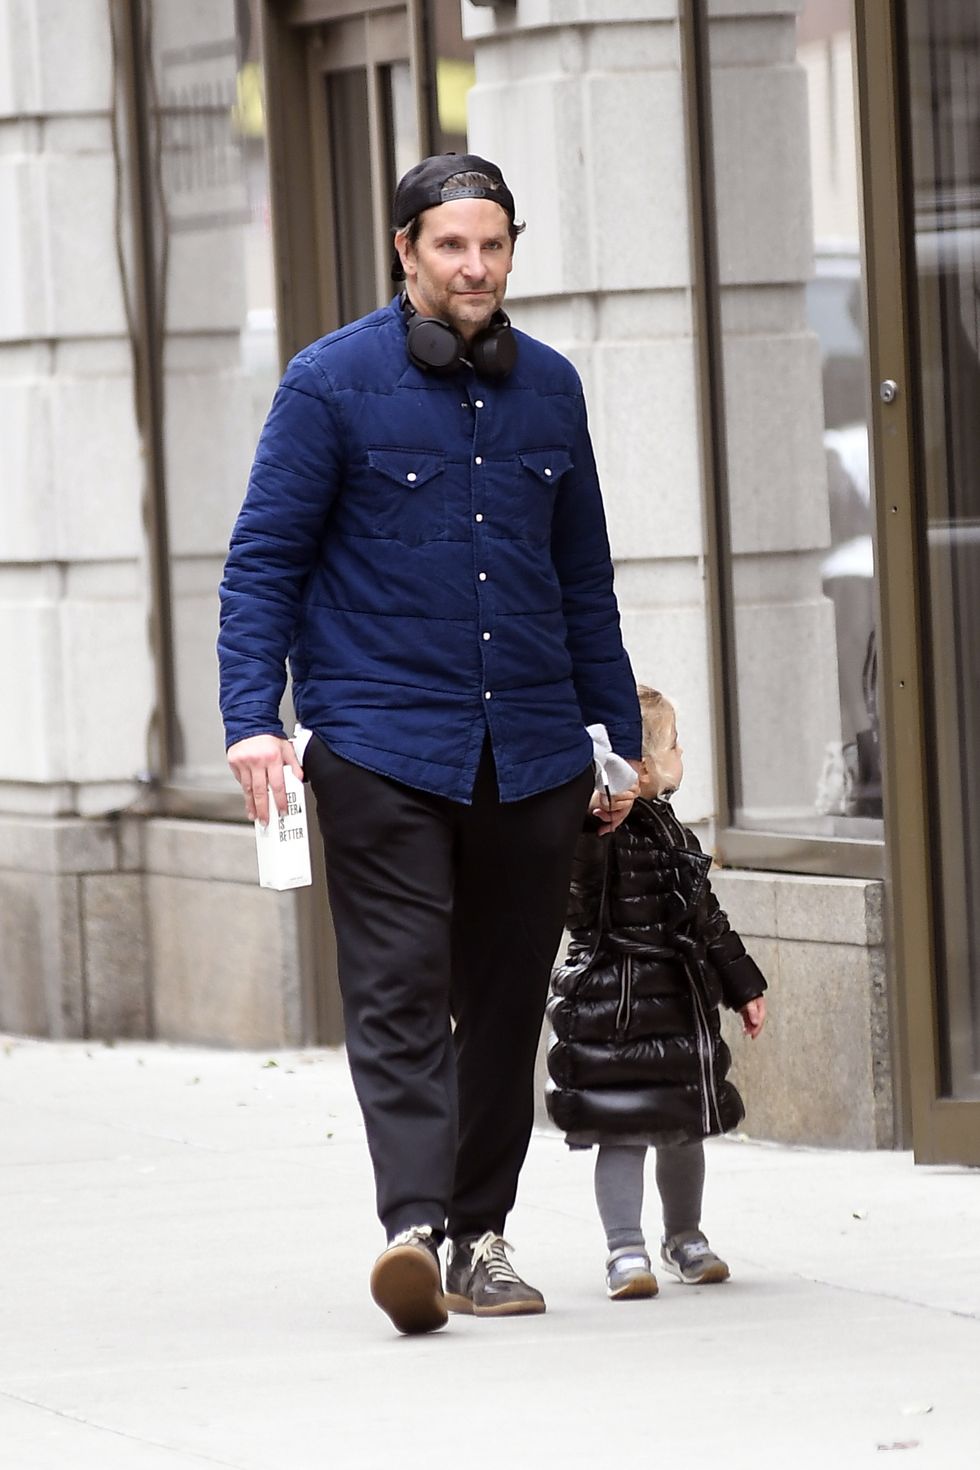 in Jacket a Bradley Cooper 2020 March Madewell in Shirt